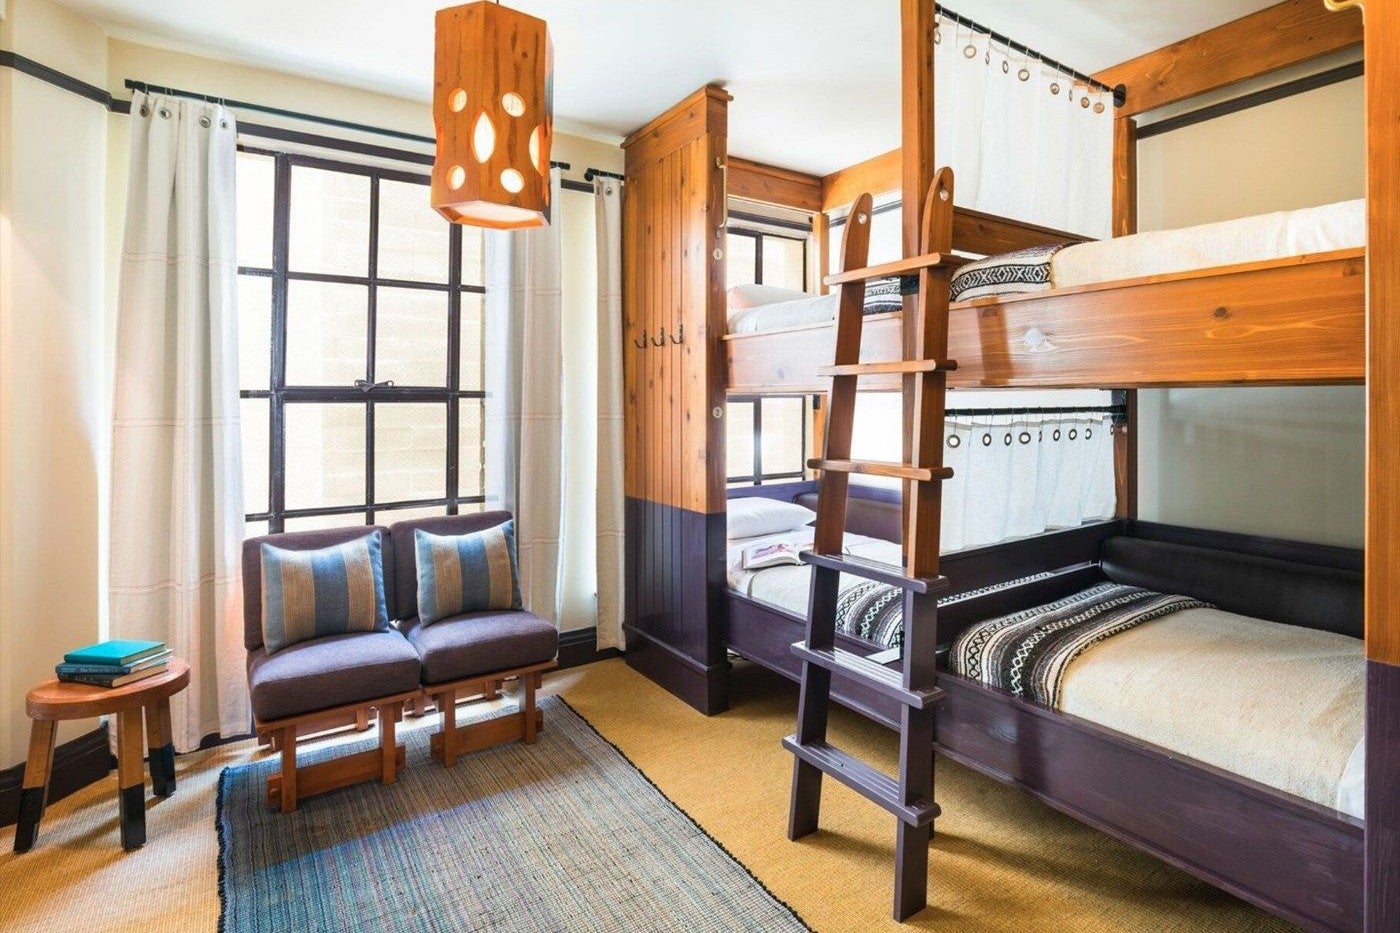 Why the US Hasn't Embraced Hostels